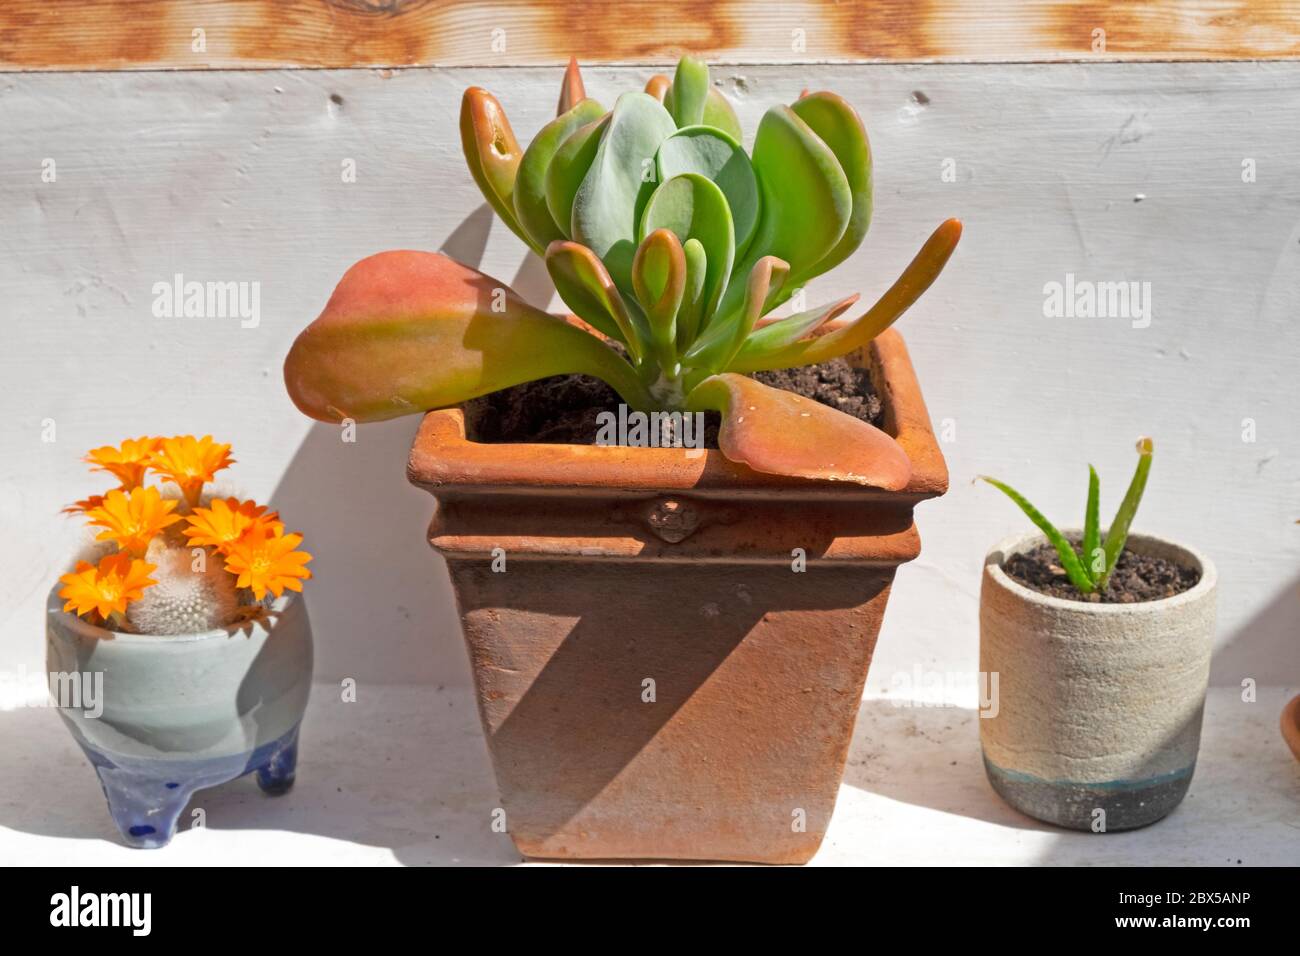 Kalanchoe, flowering small cactus & transplanted aloe vera houseplant growing on a window sill ledge indoors in a terra cotta & clay pots KATHY DEWITT Stock Photo